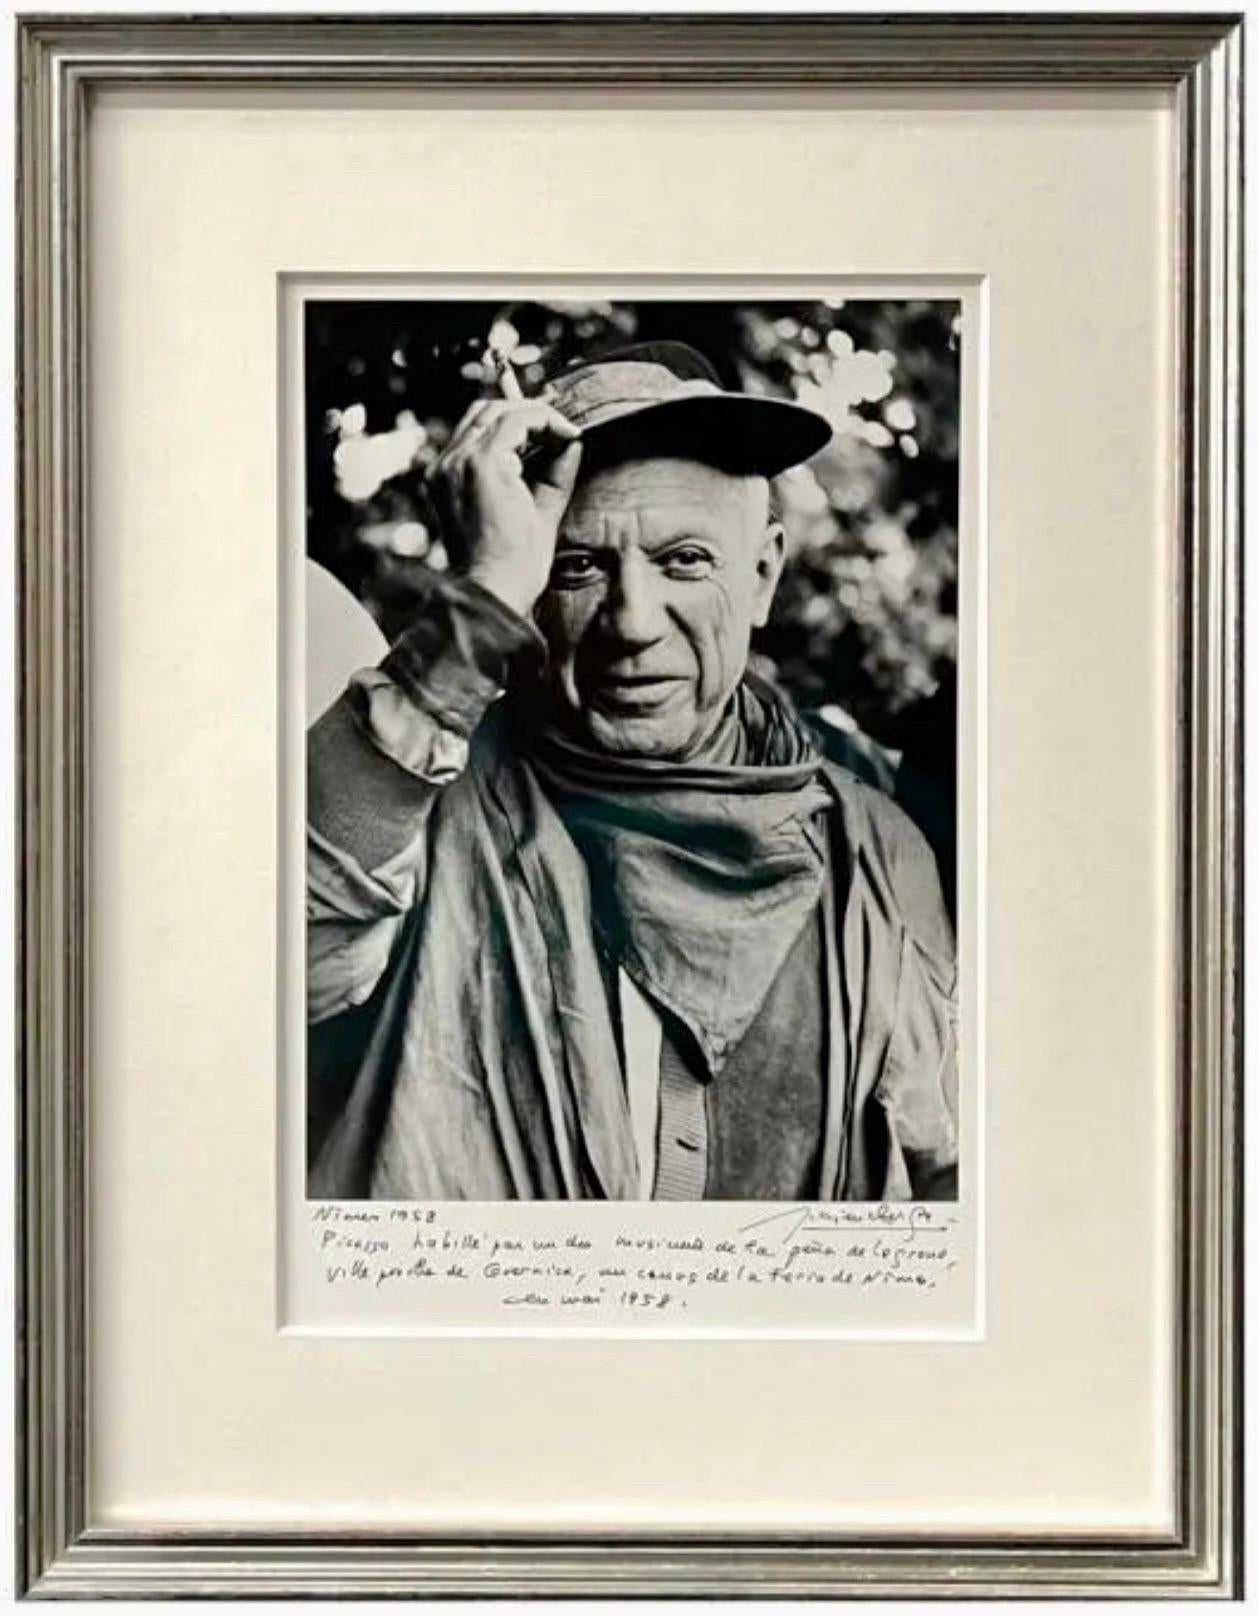 Lucien Clergue (FRENCH, 1934 - 2014) 
Gelatin silver photographic print depicting a portrait of a costumed Pablo Picasso.
During the Feria de Nîmes festival, Picasso dressed up as a musician of Peña de Logroño, a town close to Guernica, at the